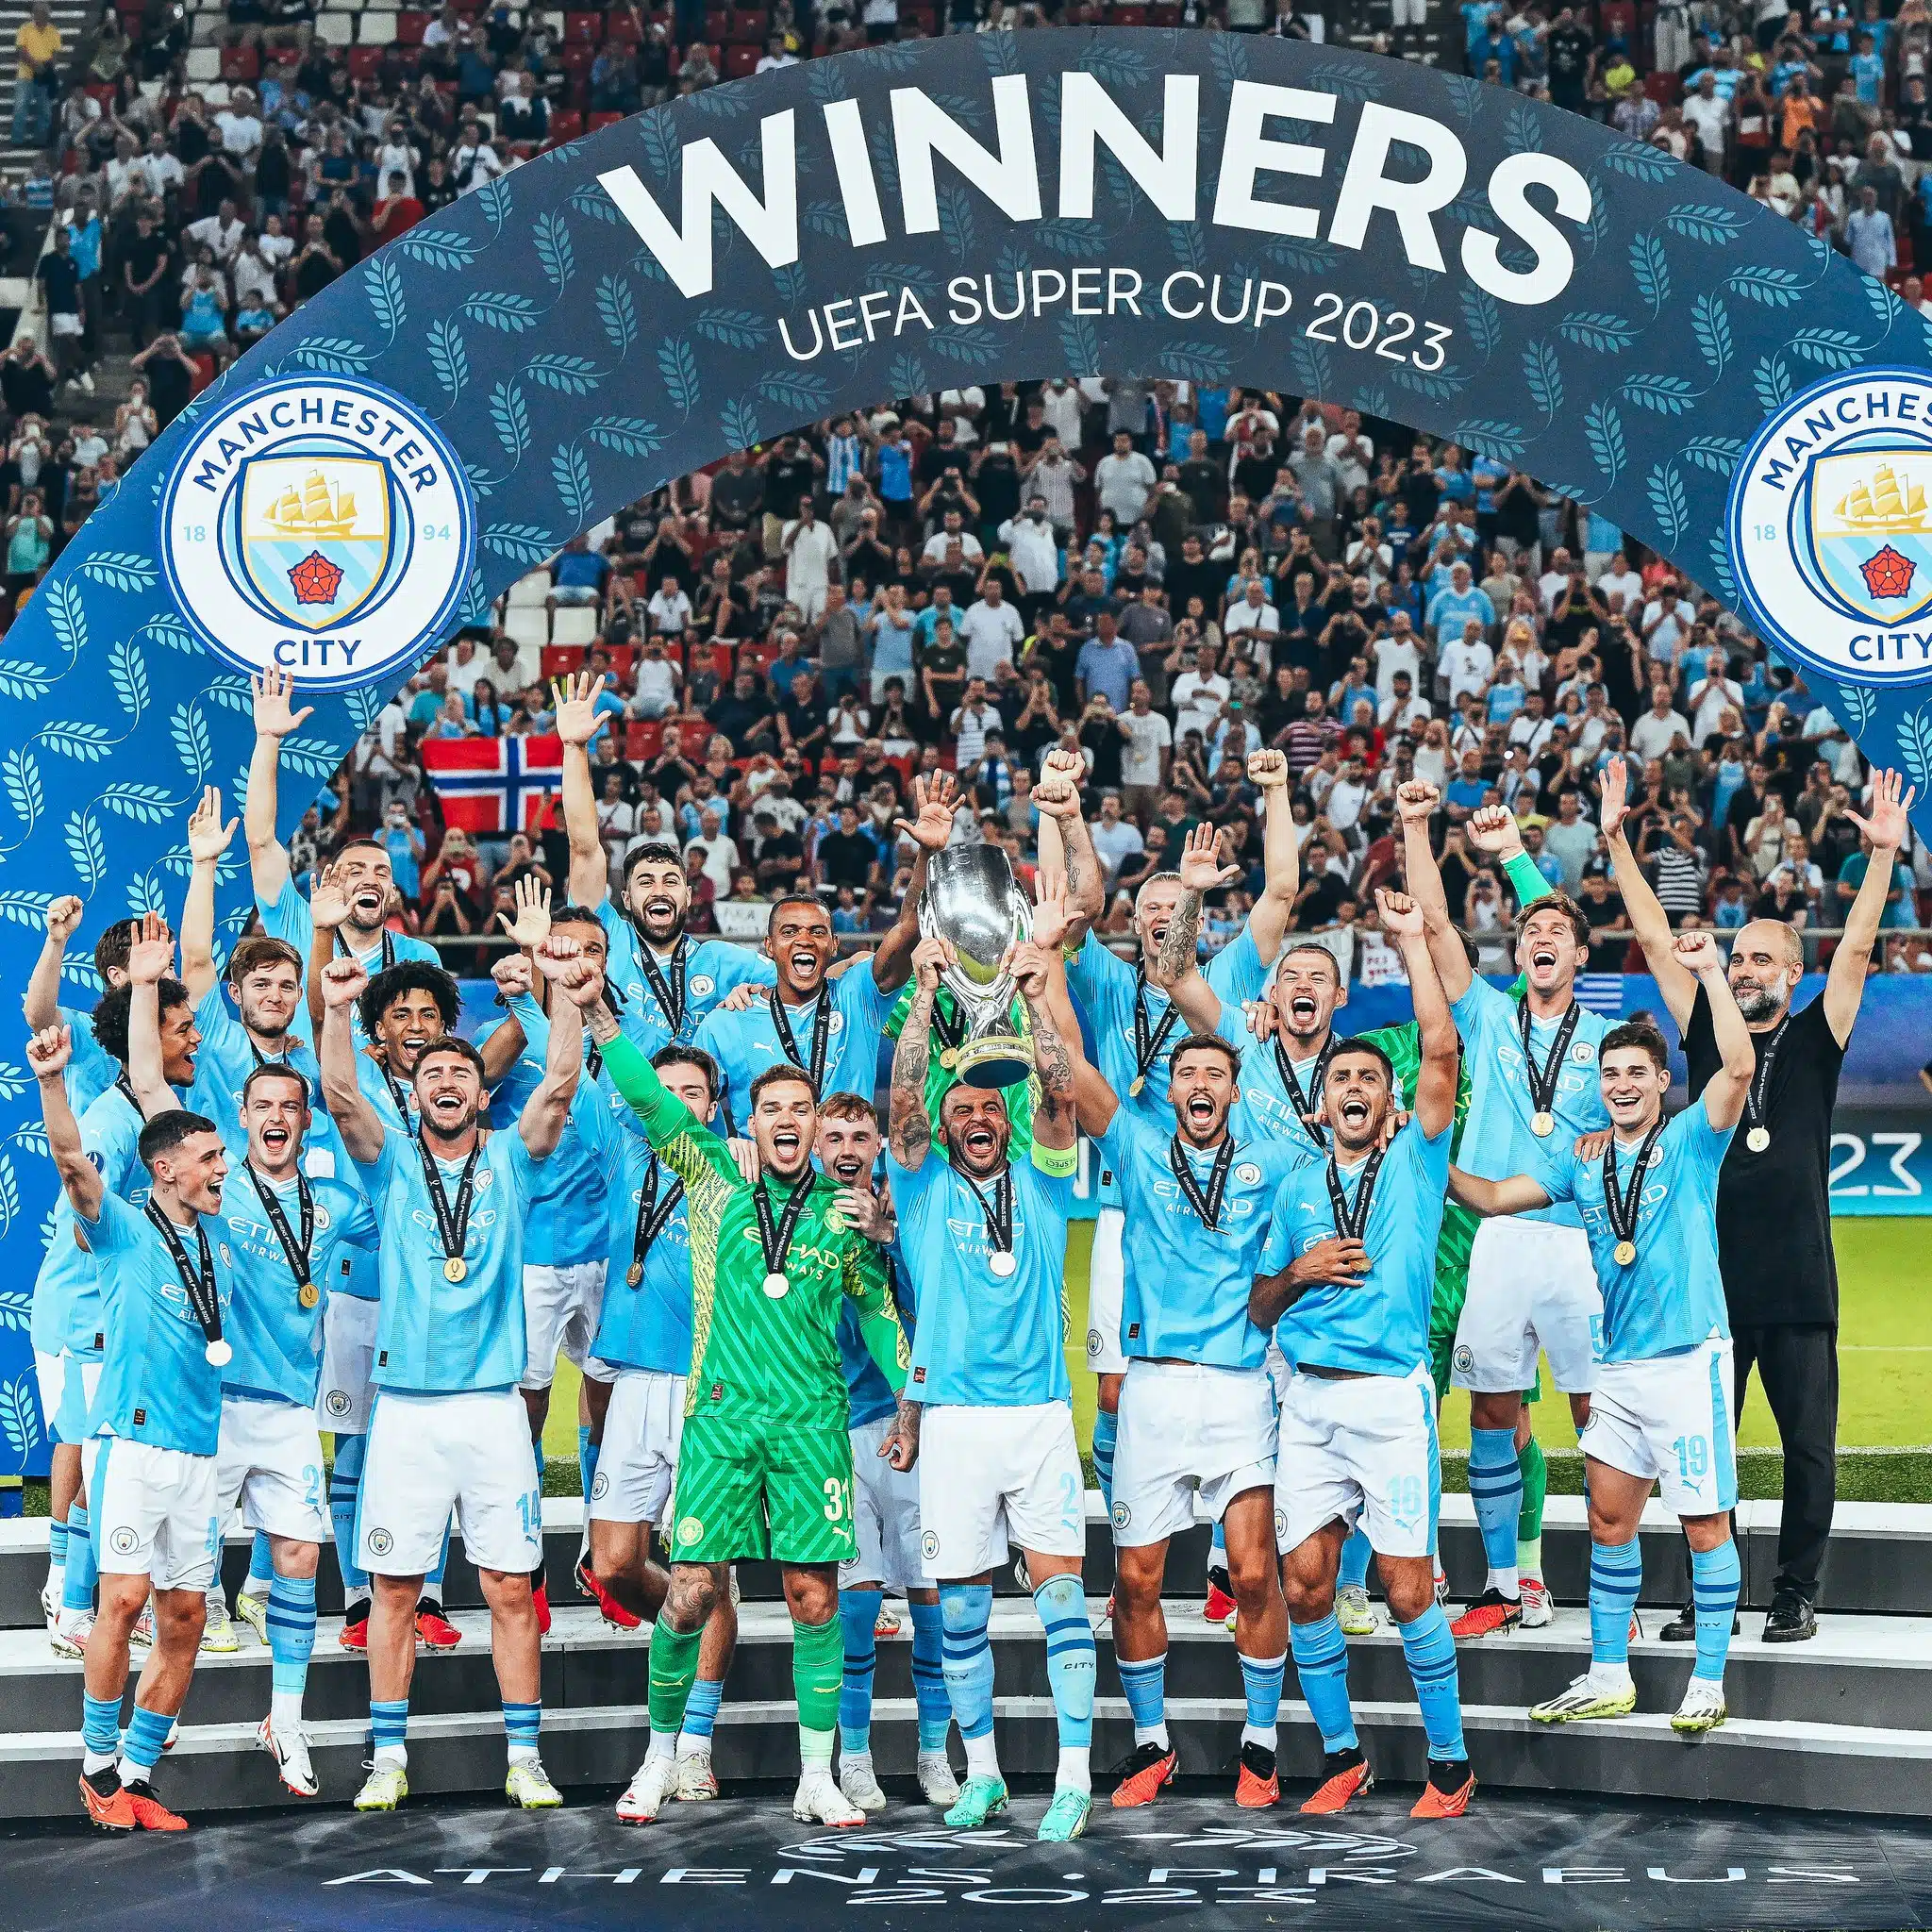 Manchester City Beat Sevilla Via Penalties To Win First UEFA Super Cup